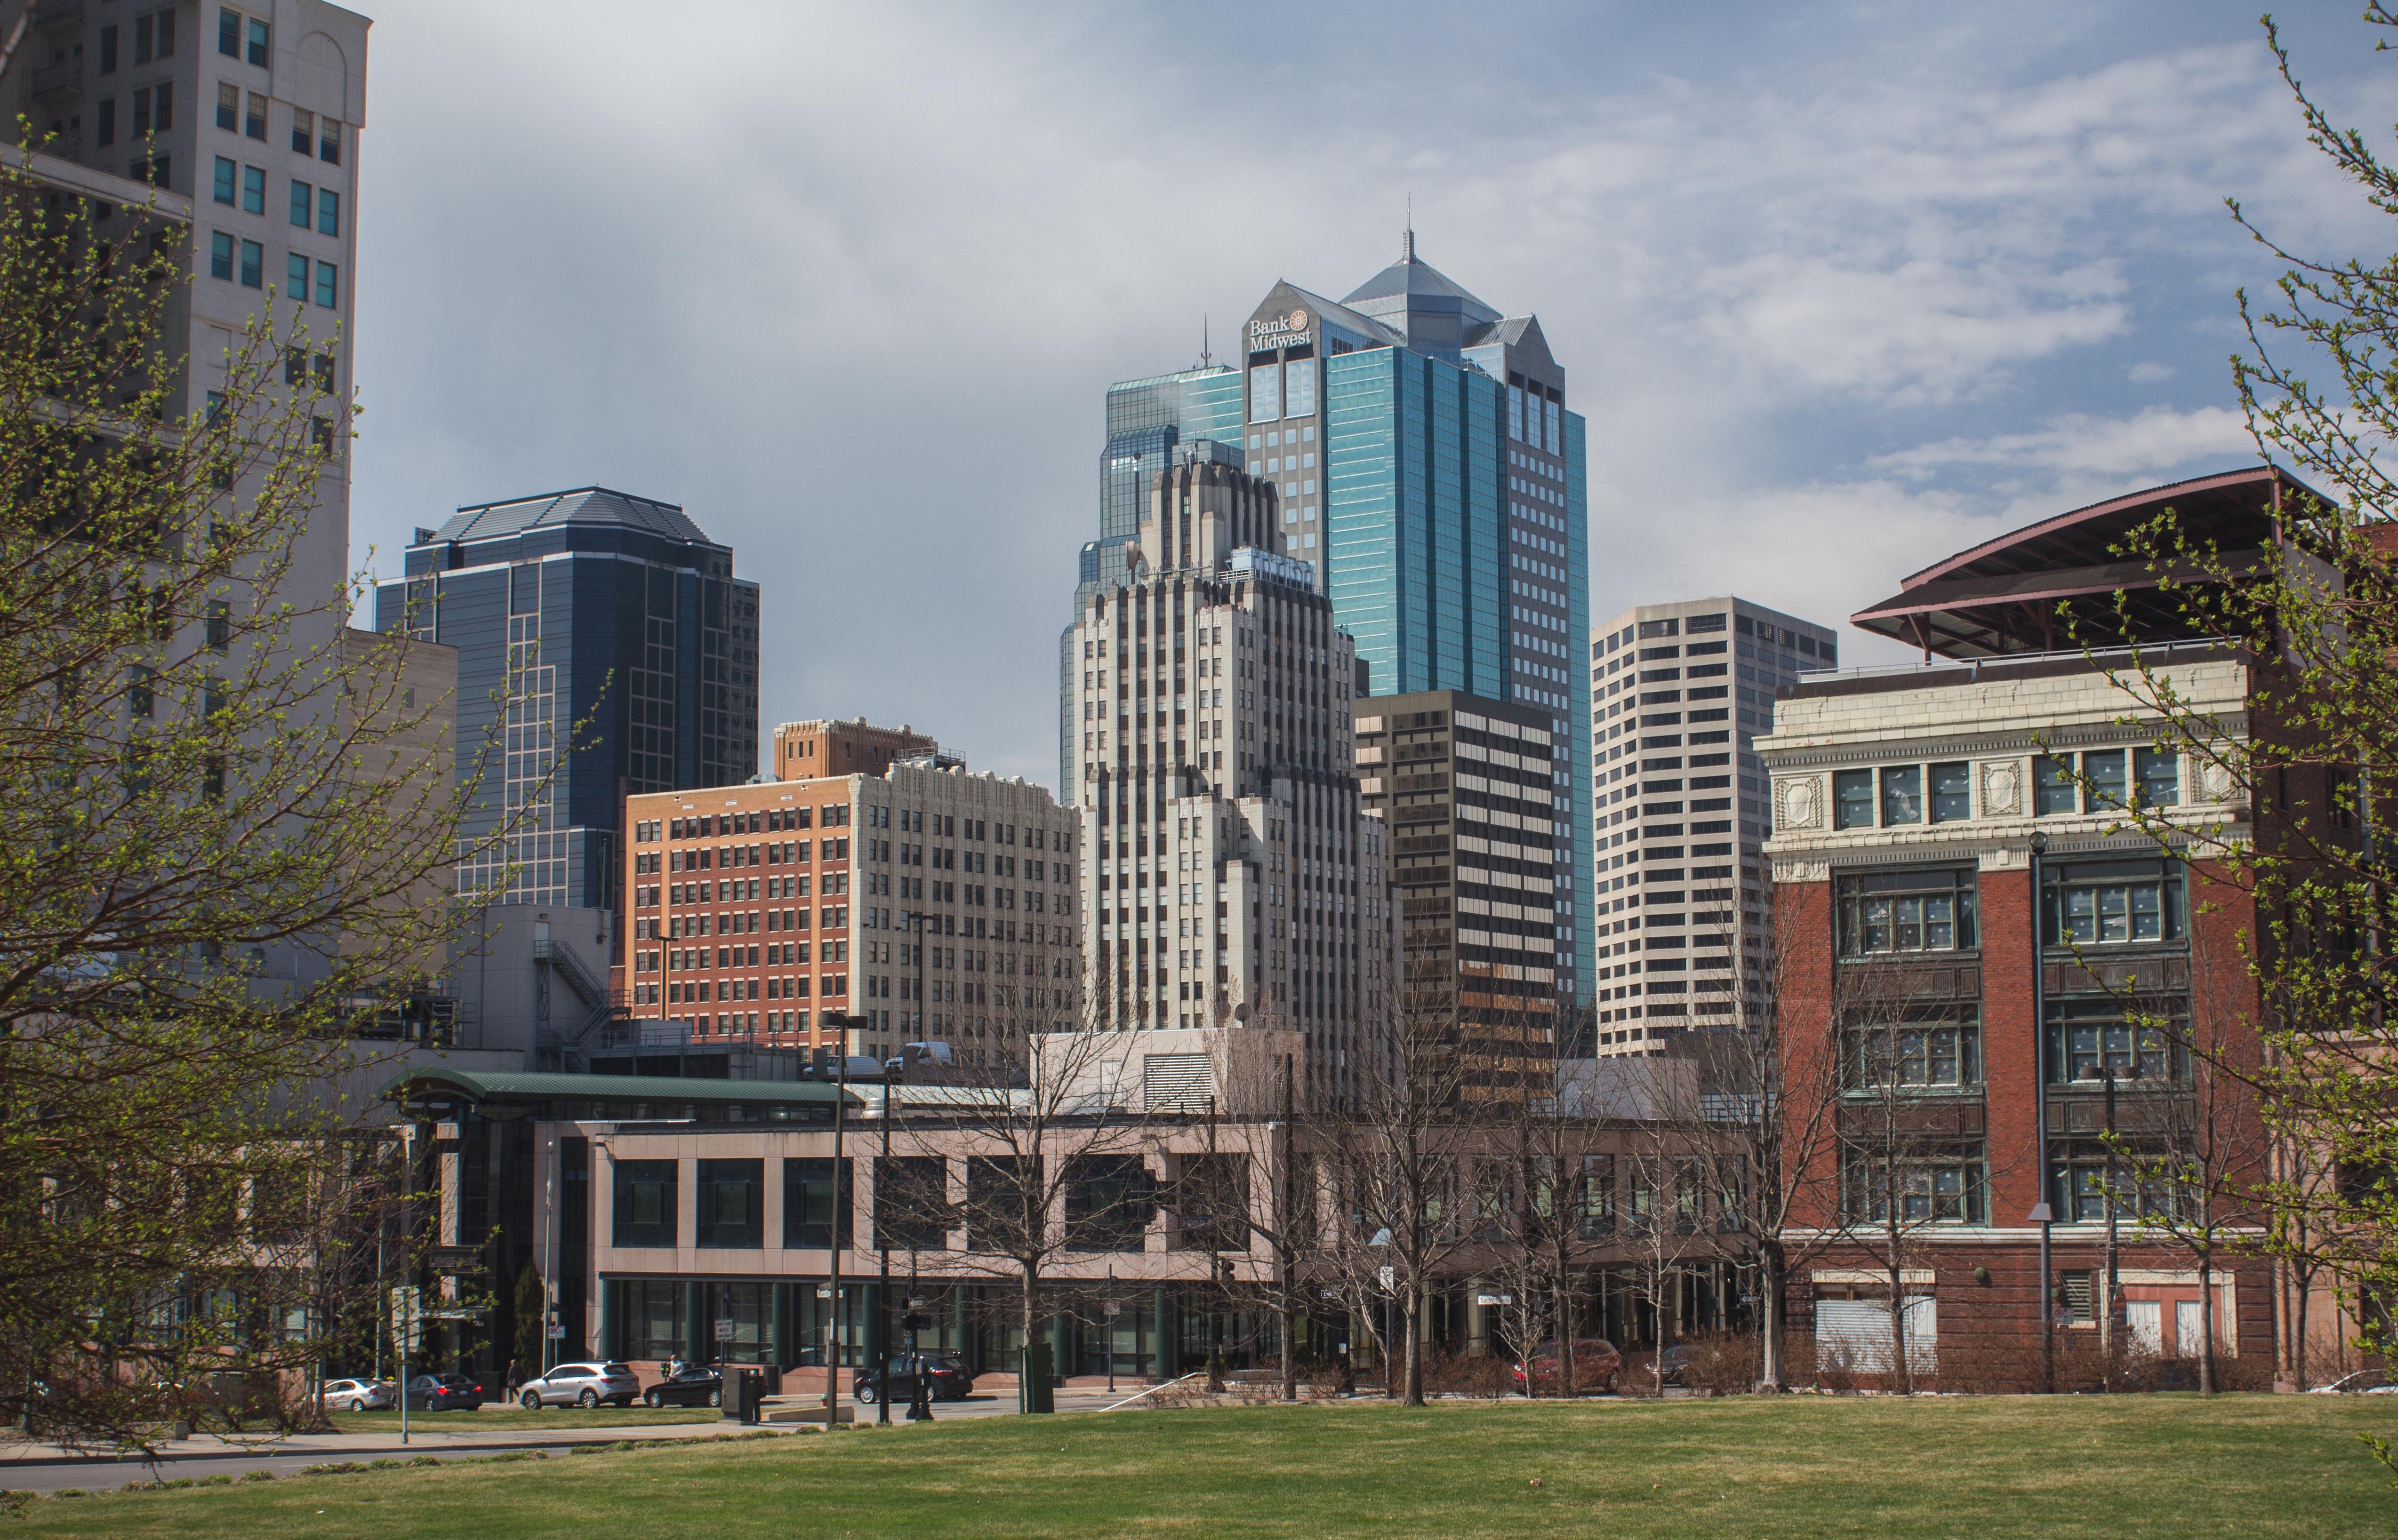 5 takeaways from most entrepreneurial city report